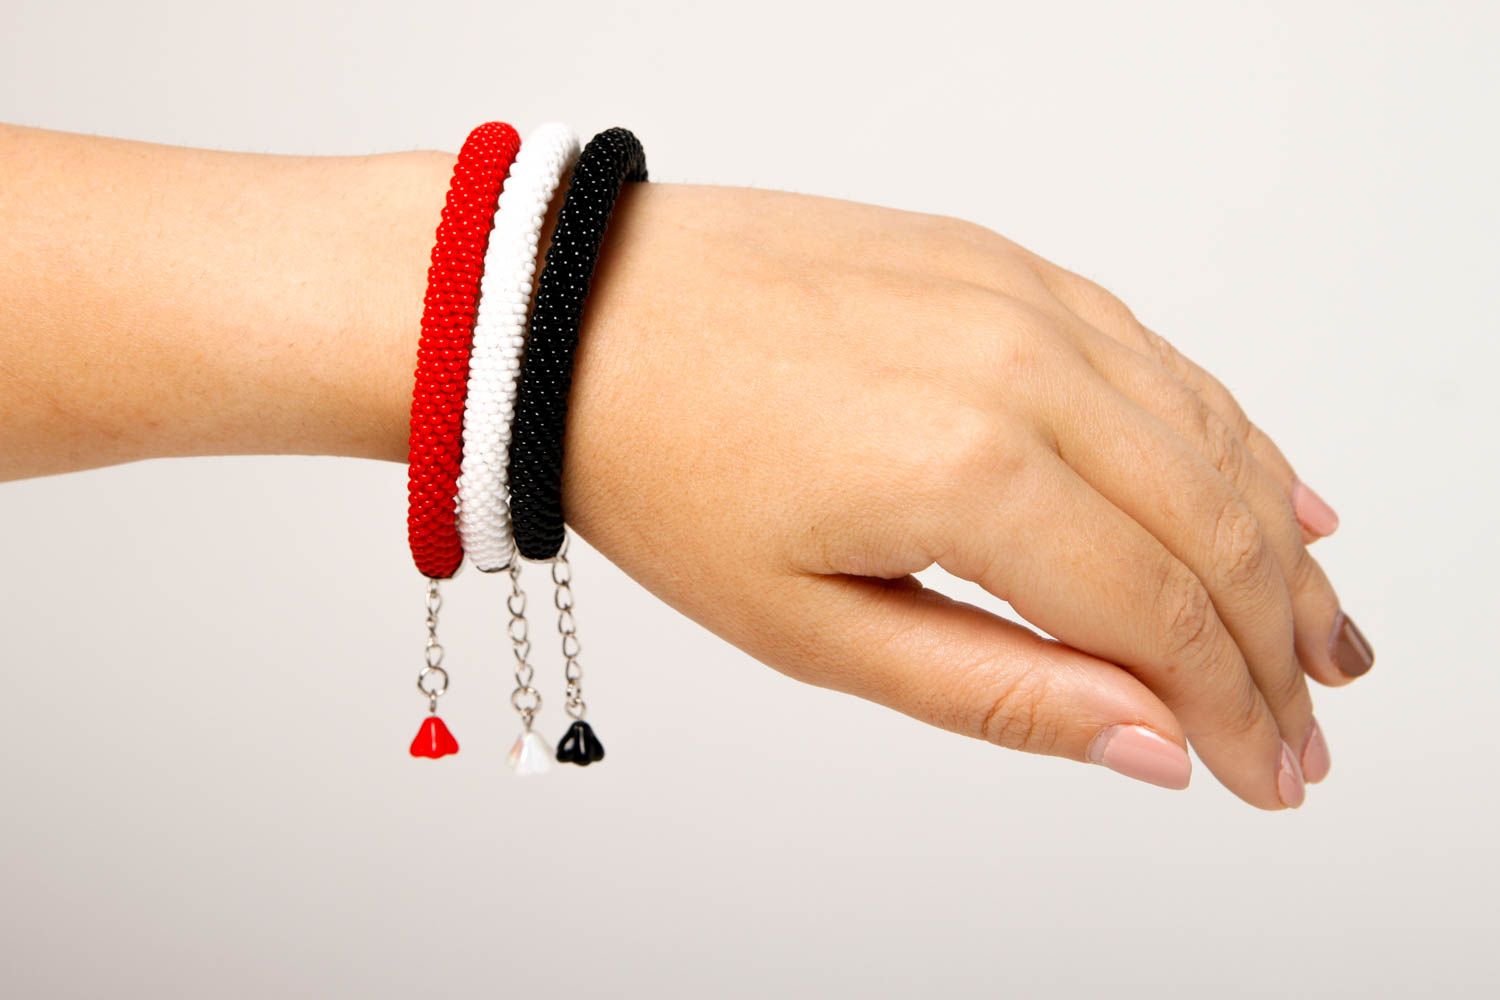 Handmade three-row beaded cord bracelet in black, red, and white colors photo 2